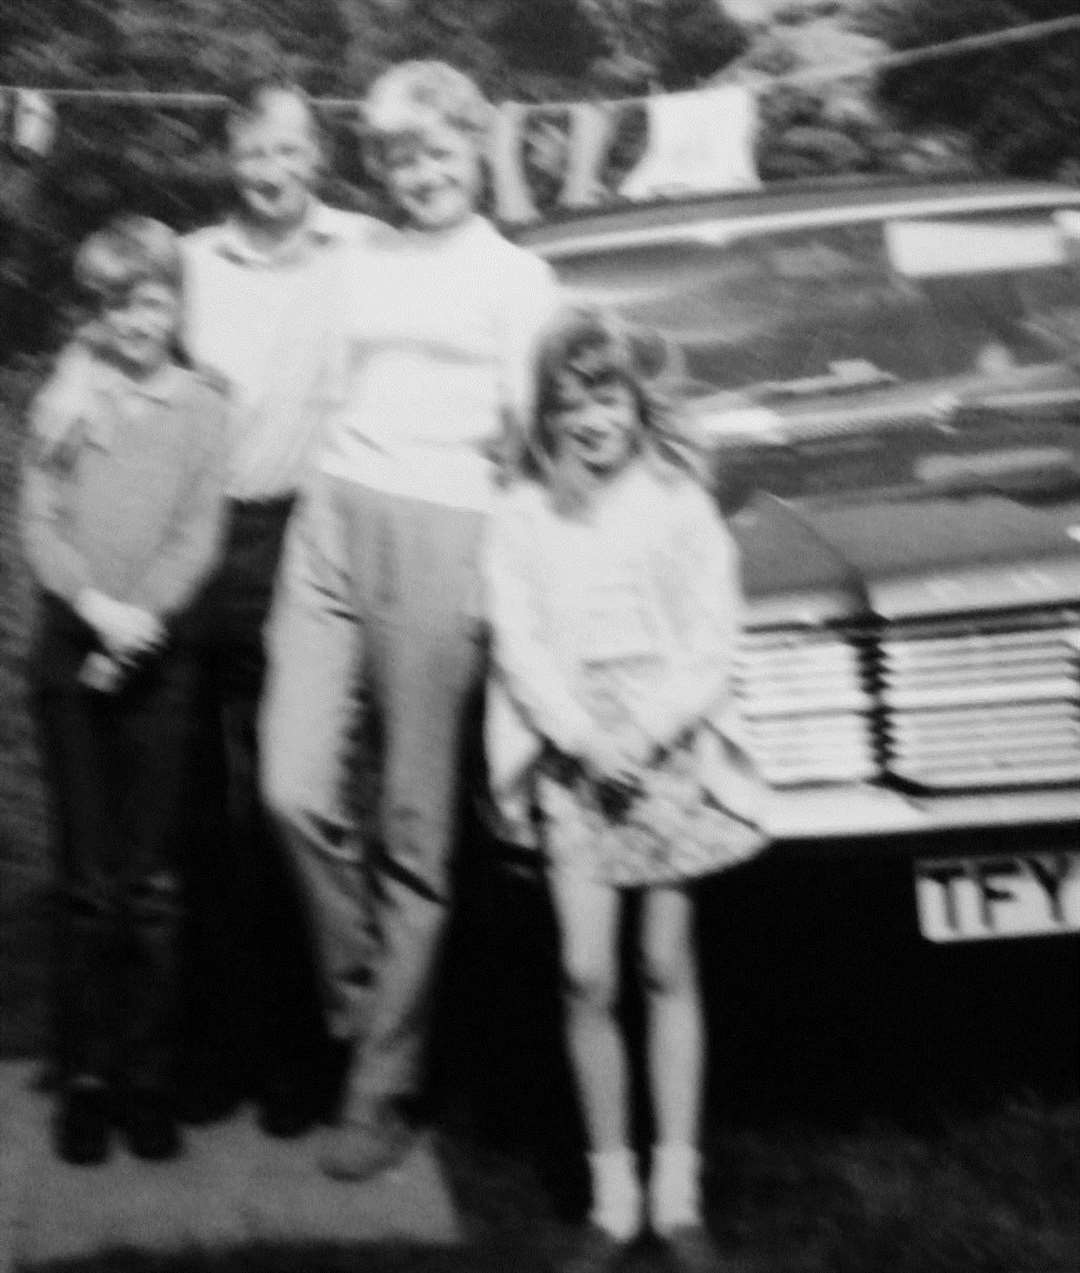 Cedric and Joyce Bibby with twins Martyn and Linda.